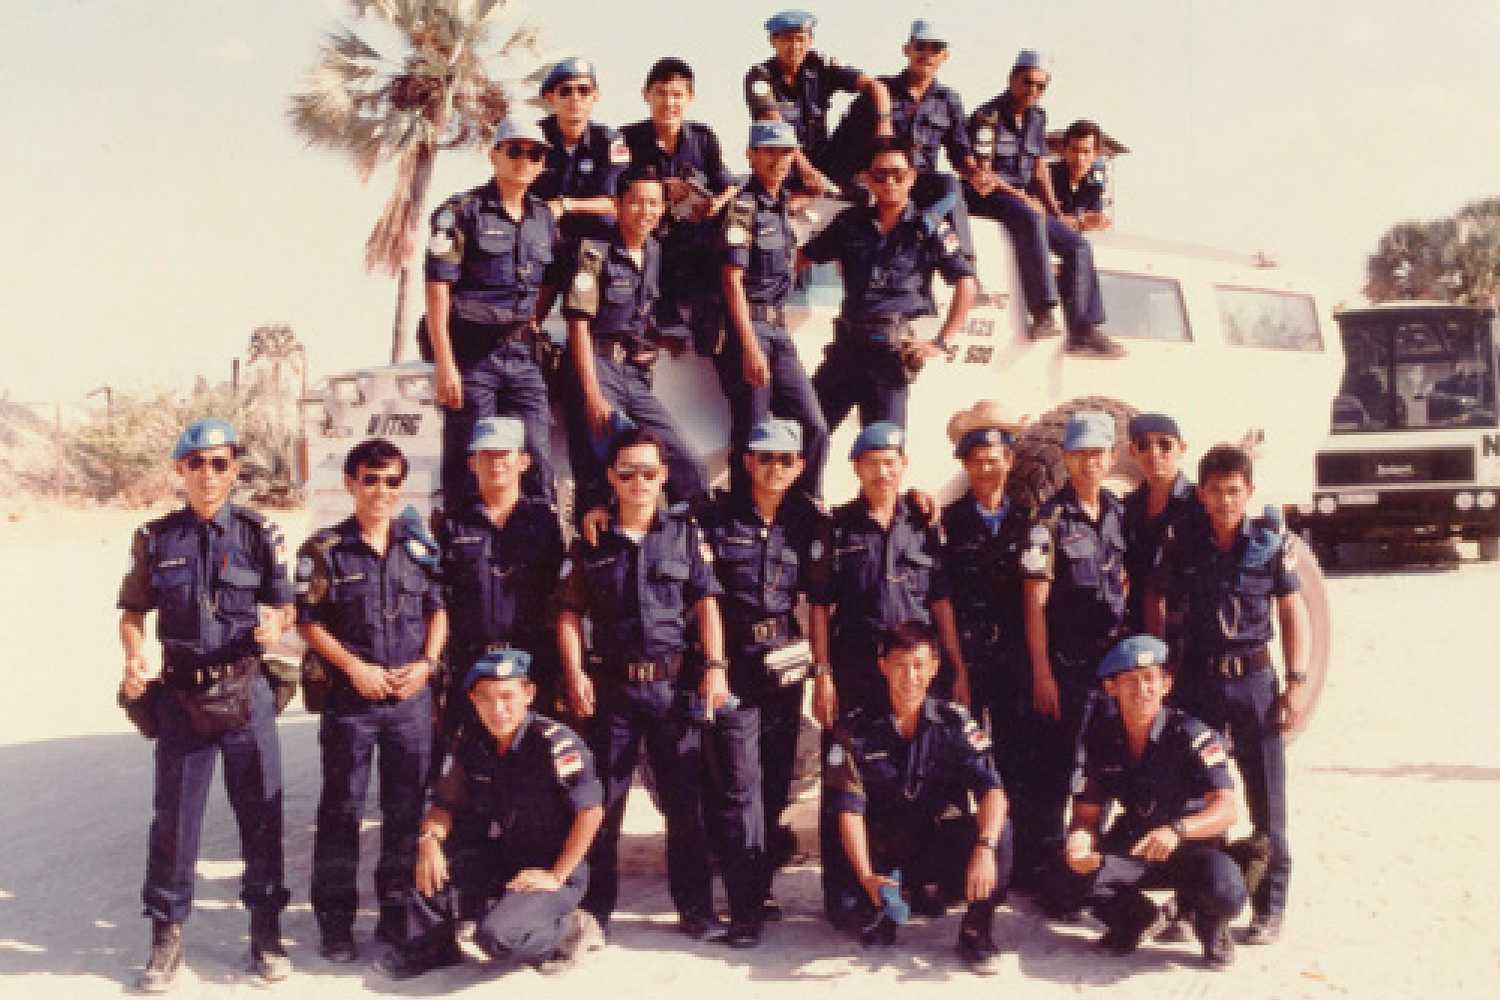 group of police officers in the desert, posing with a white colour Armoured Personnel Carrier, with some officers seated on top. 